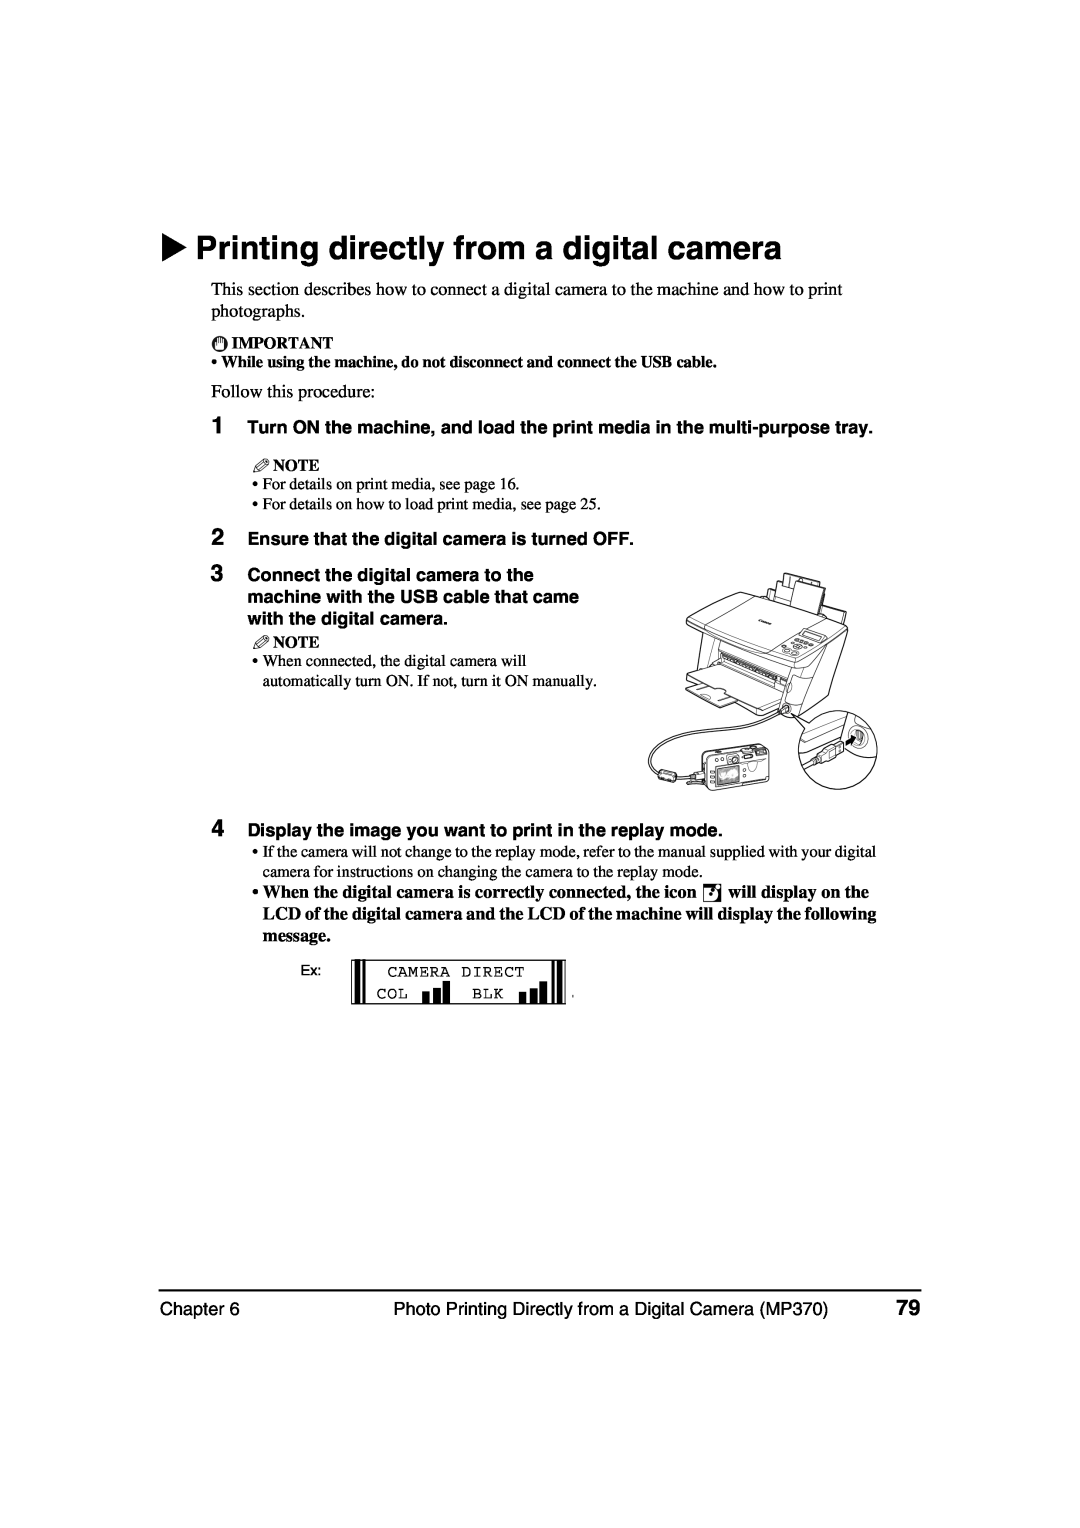 Canon MP360 manual Photo Printing Directly from a Digital Camera MP370, Camera Direct 